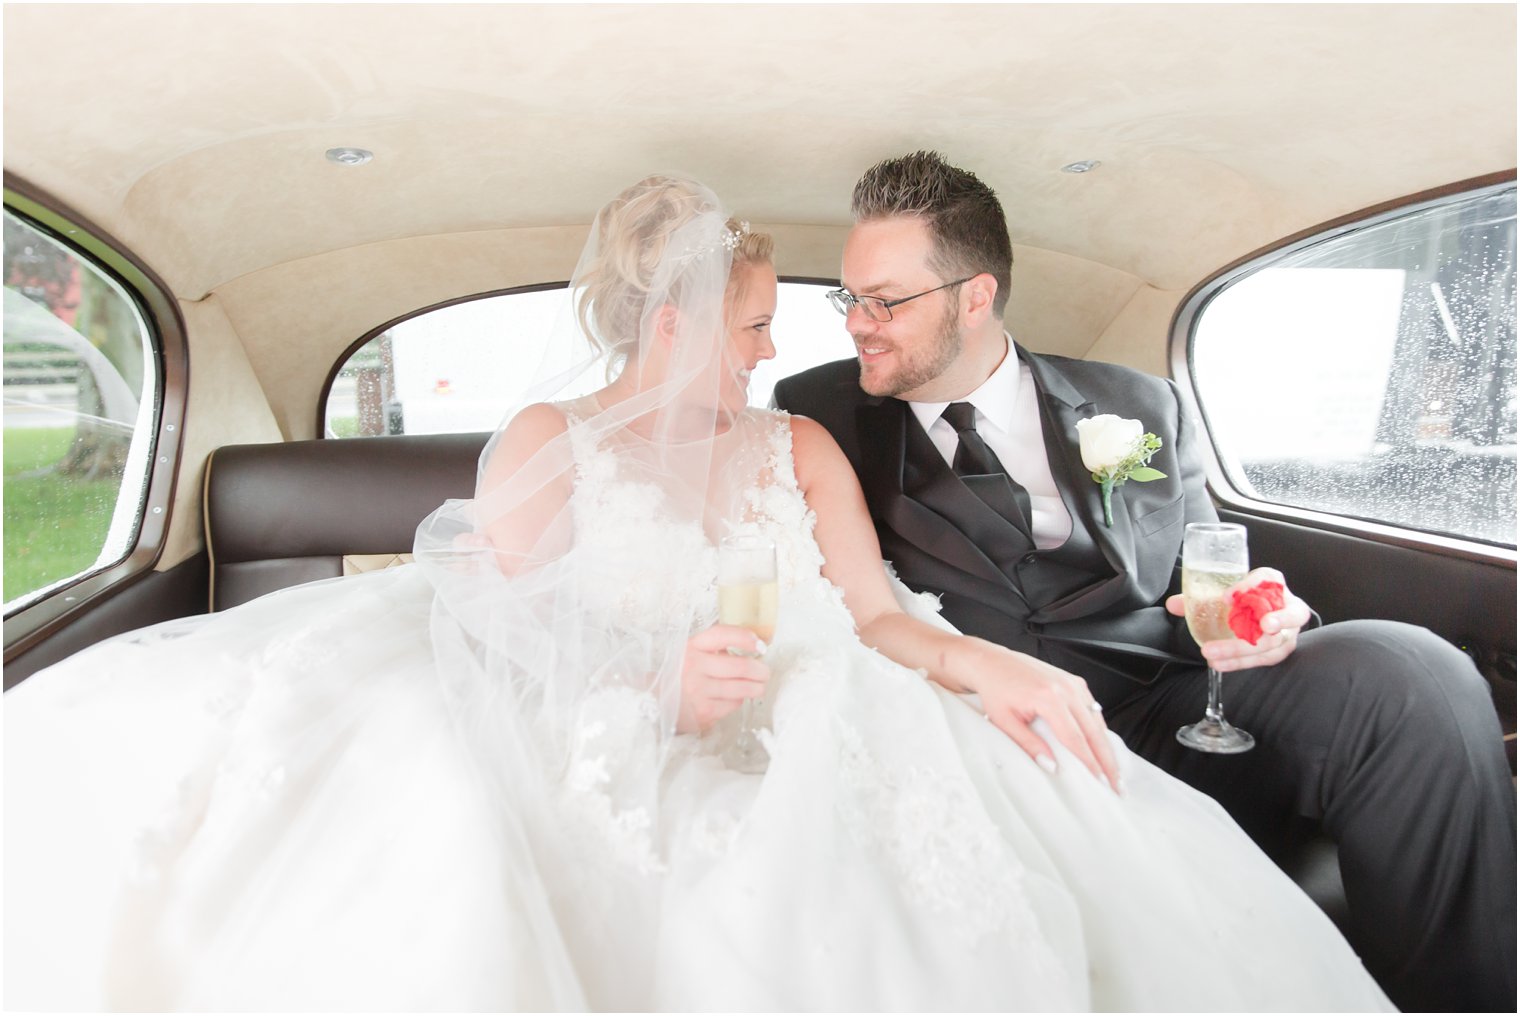 bride and groom share champagne after wedding ceremony in classic car